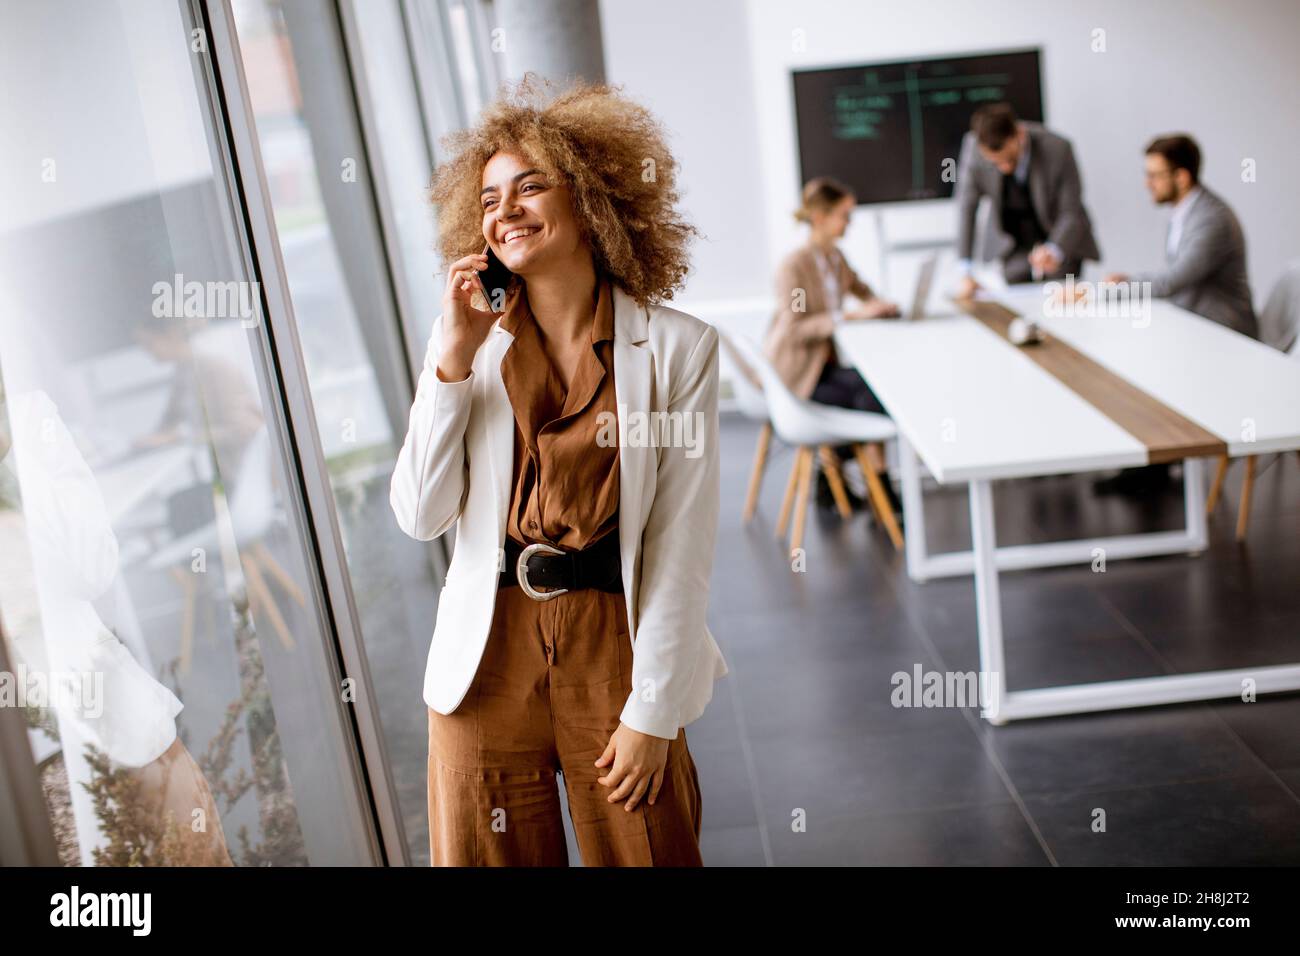 Young curly hair businesswoman using mobile phone in the office with young people works behind her Stock Photo